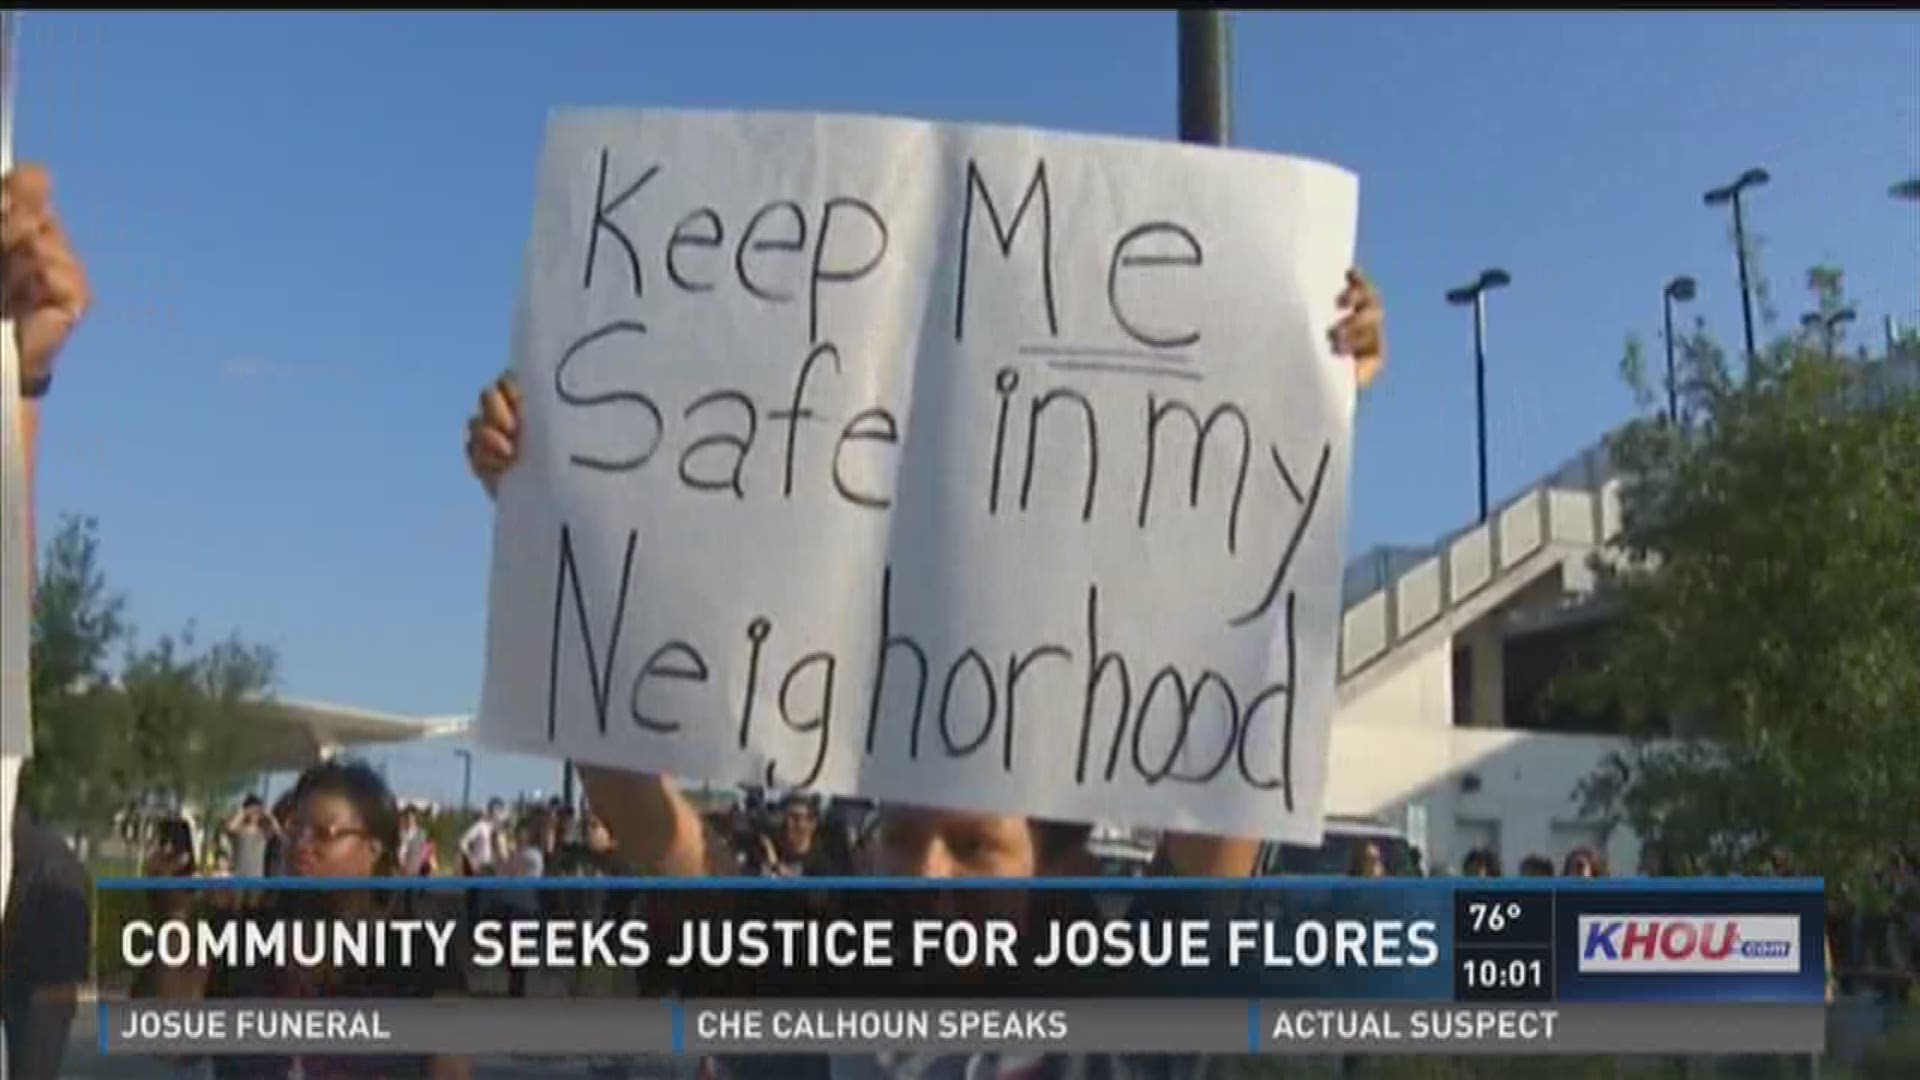 Family members and neighbors of Josue Flores marched on Sunday in an effort to bring justice and change after the boy was murdered last week. 